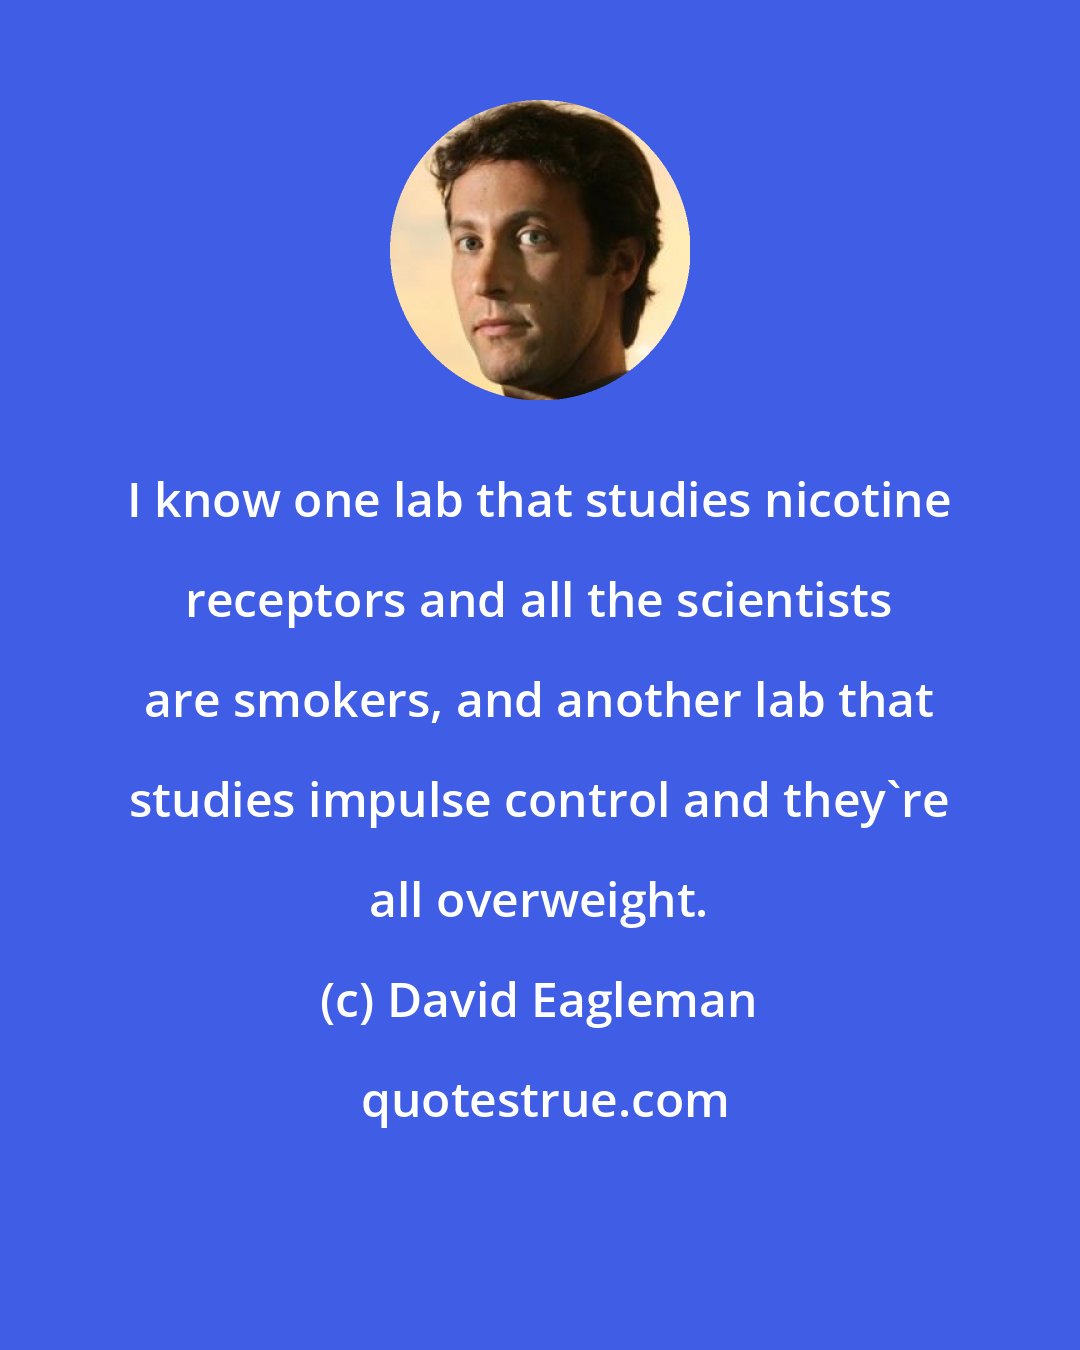 David Eagleman: I know one lab that studies nicotine receptors and all the scientists are smokers, and another lab that studies impulse control and they're all overweight.